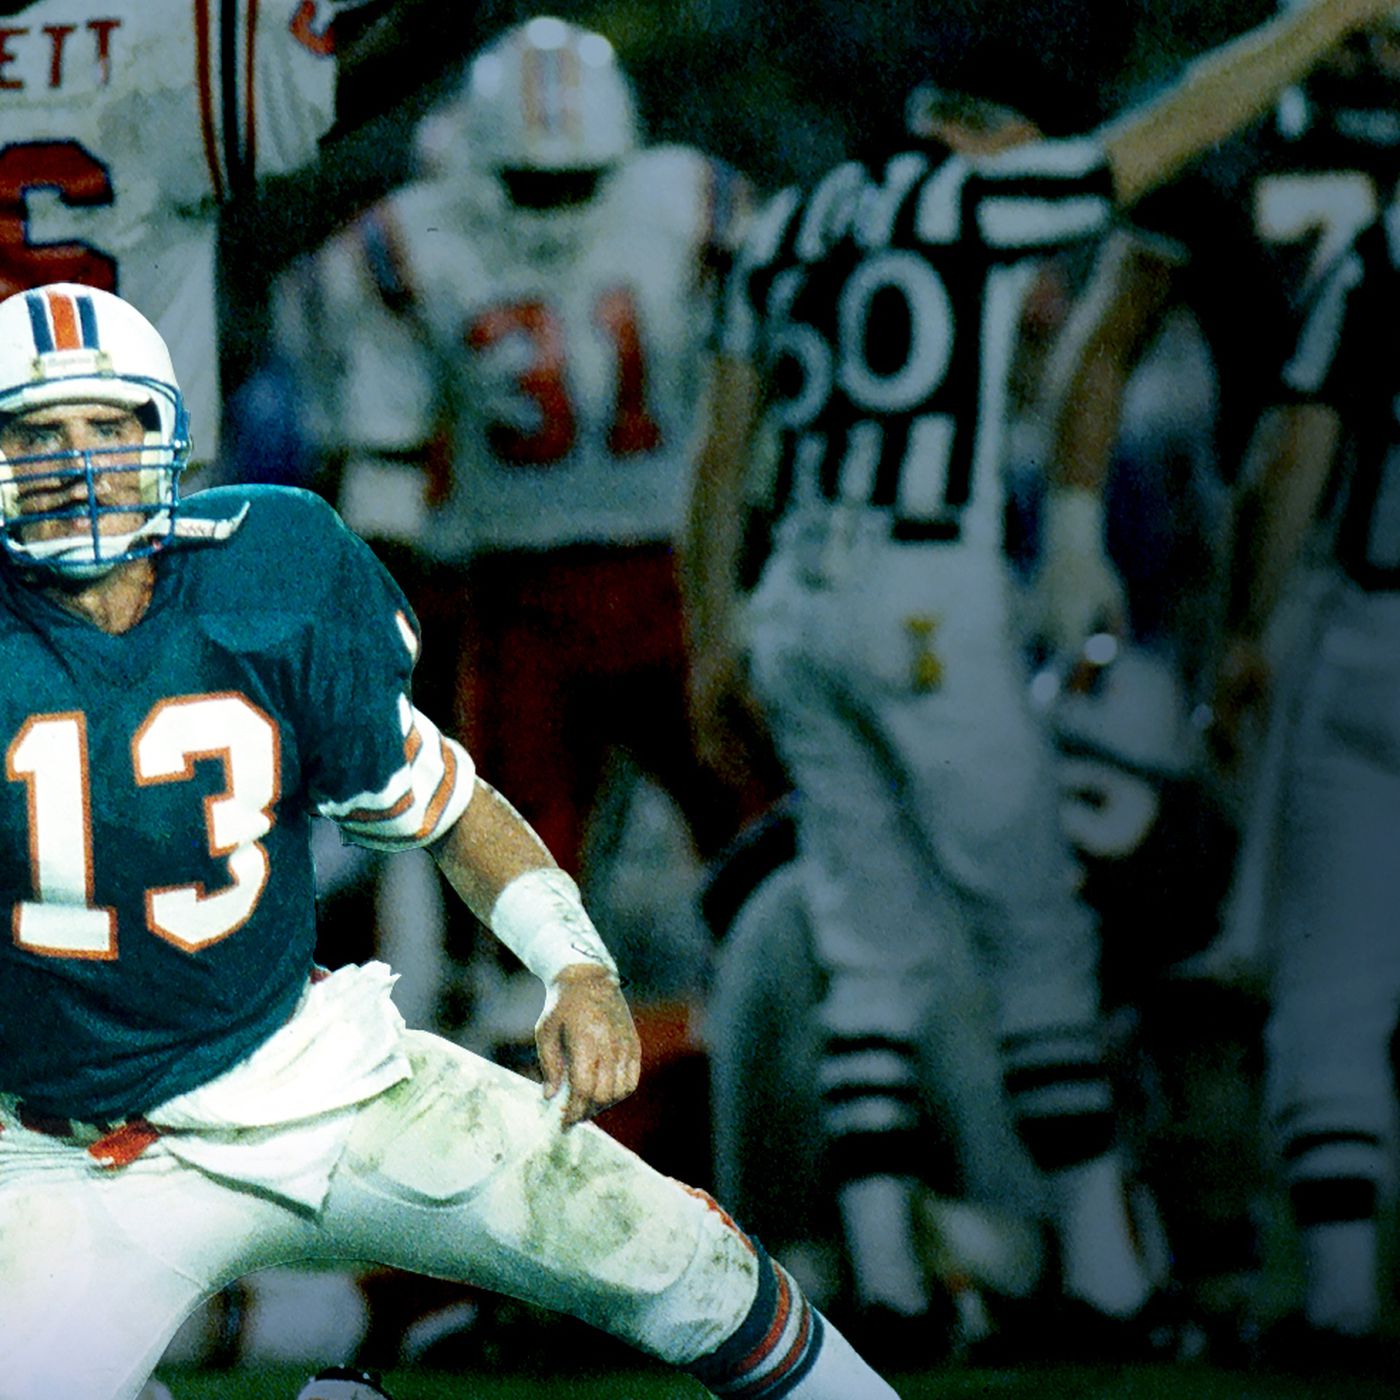 This Day In Sports: Dan Marino's Super Bowl